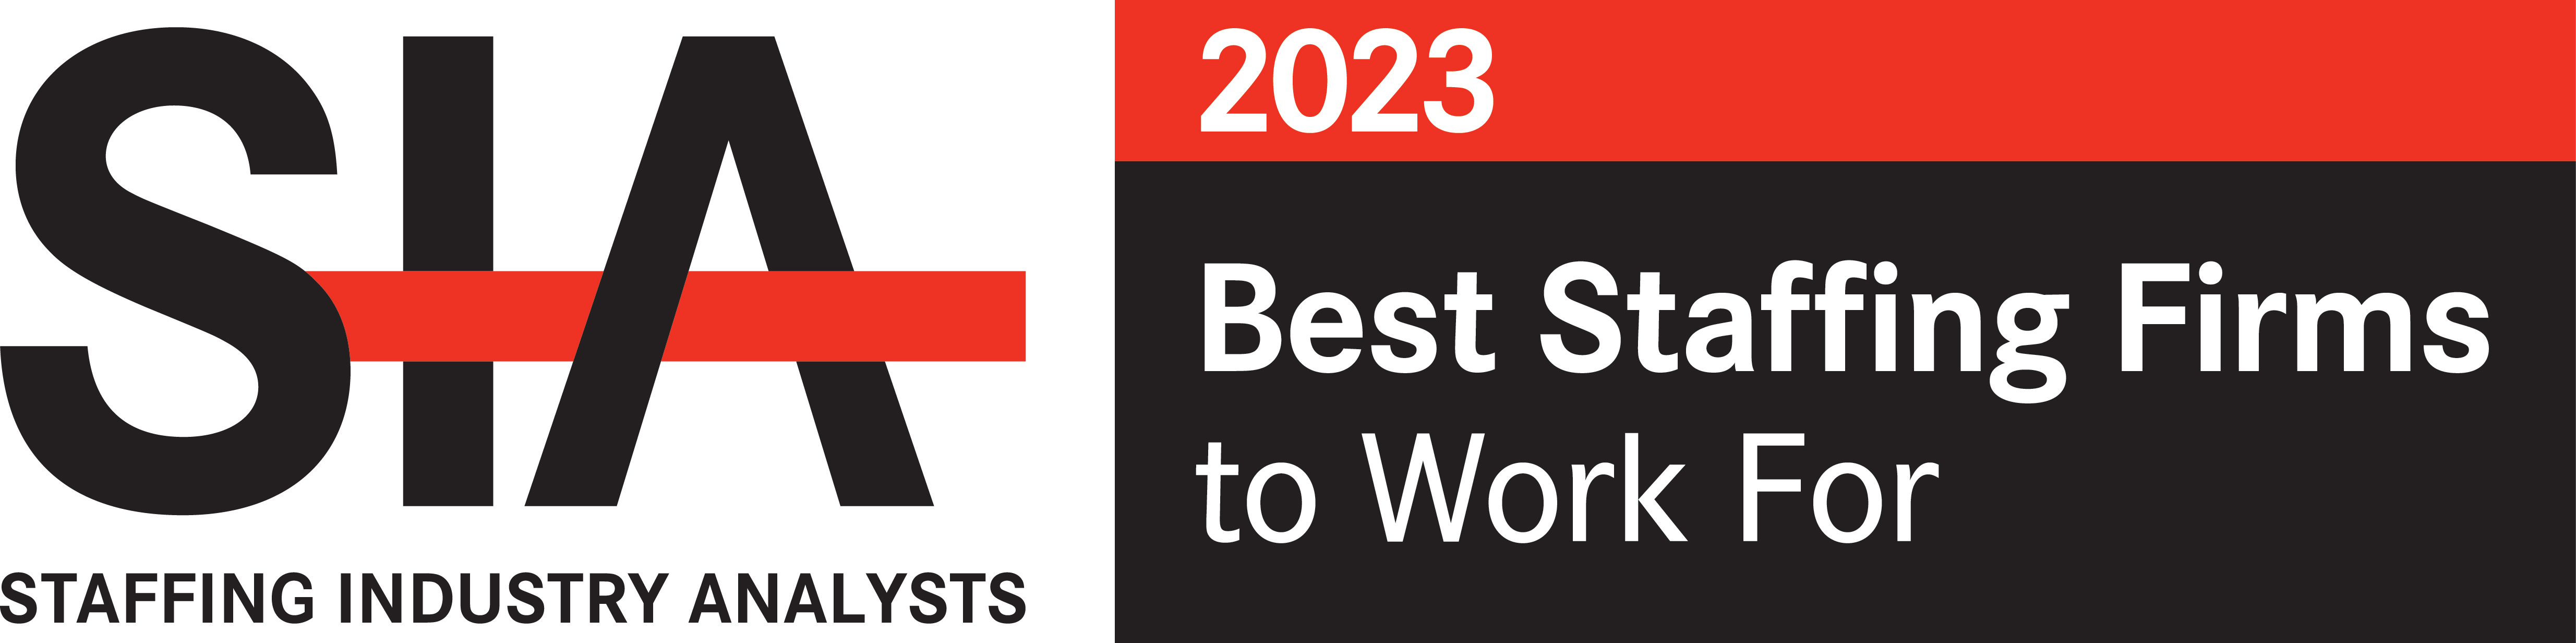 Best Staffing Firms to work for 2023